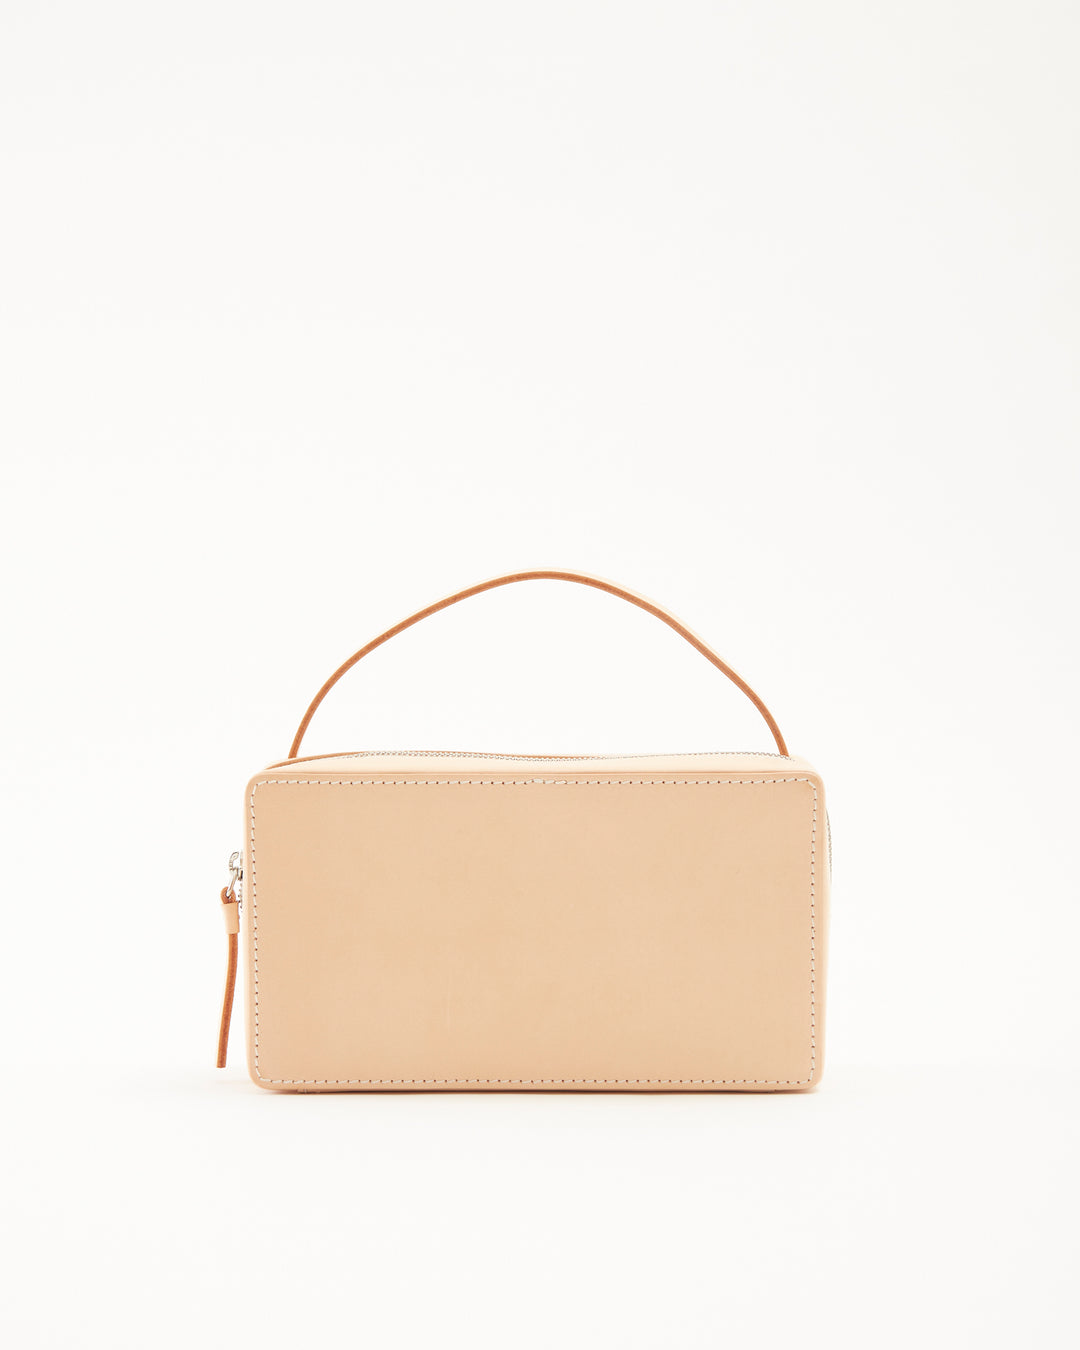 COS Versatile Leather Shopper in Natural